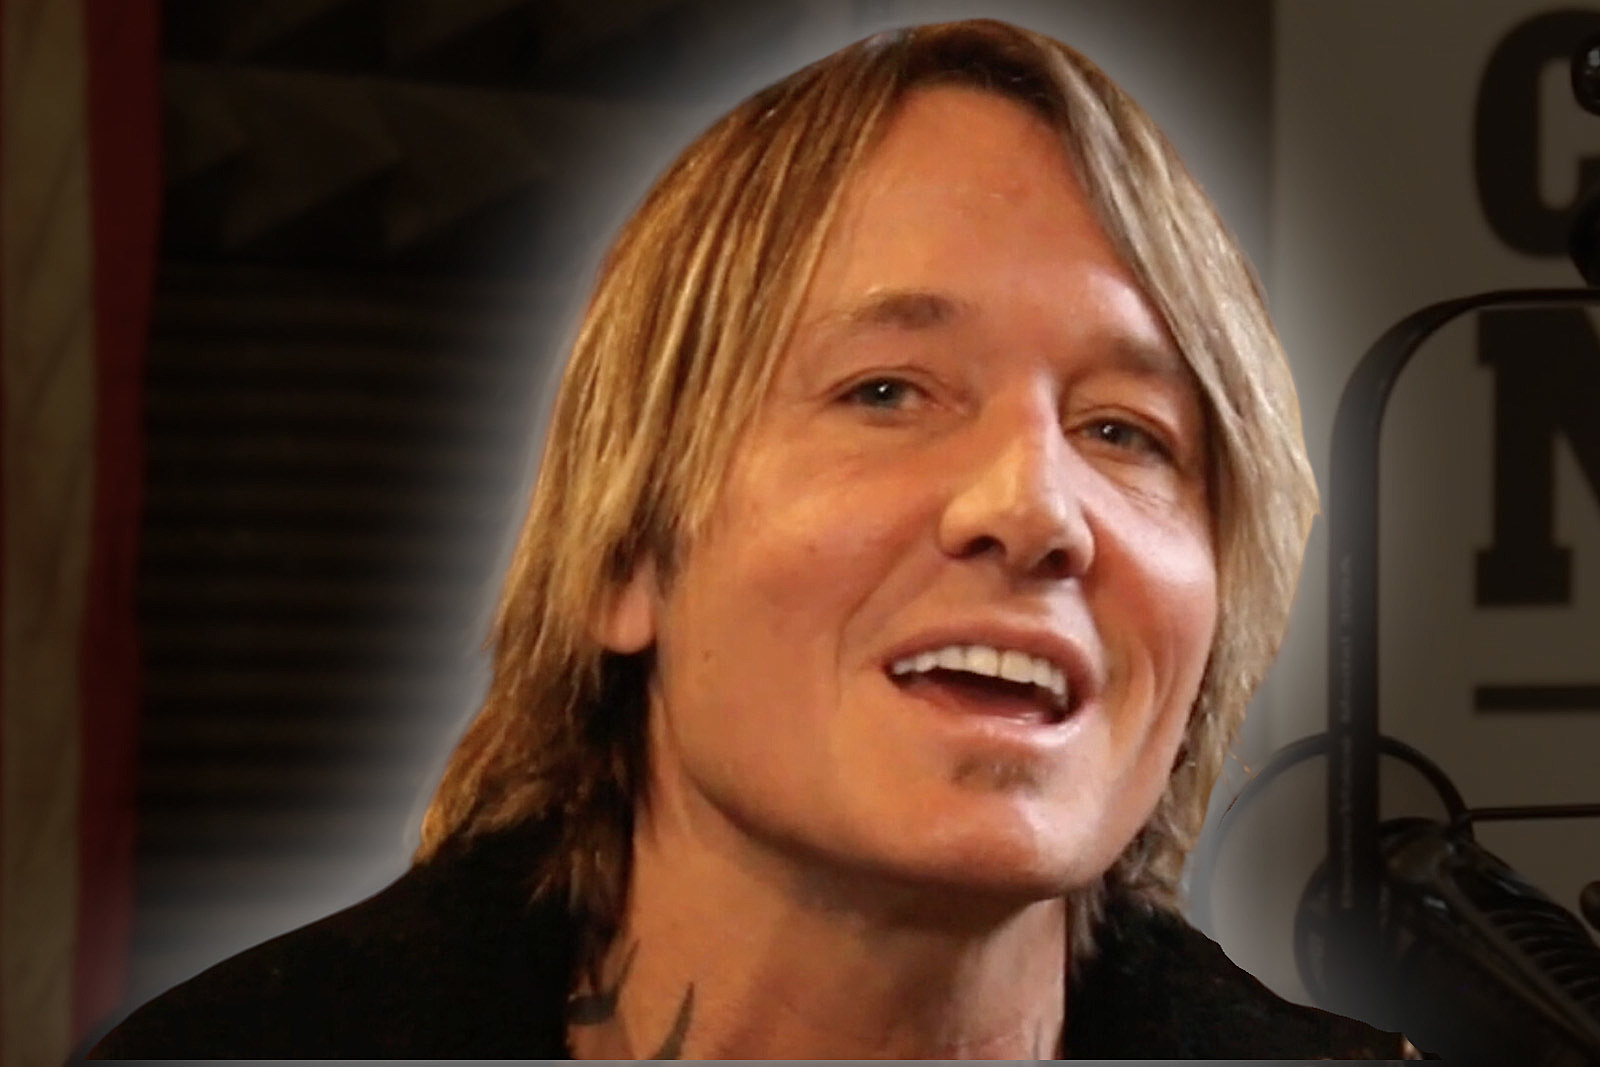 Keith Urban Absolutely Relates to Toxicity Described In ‘Messed Up
as Me’ Lyrics 